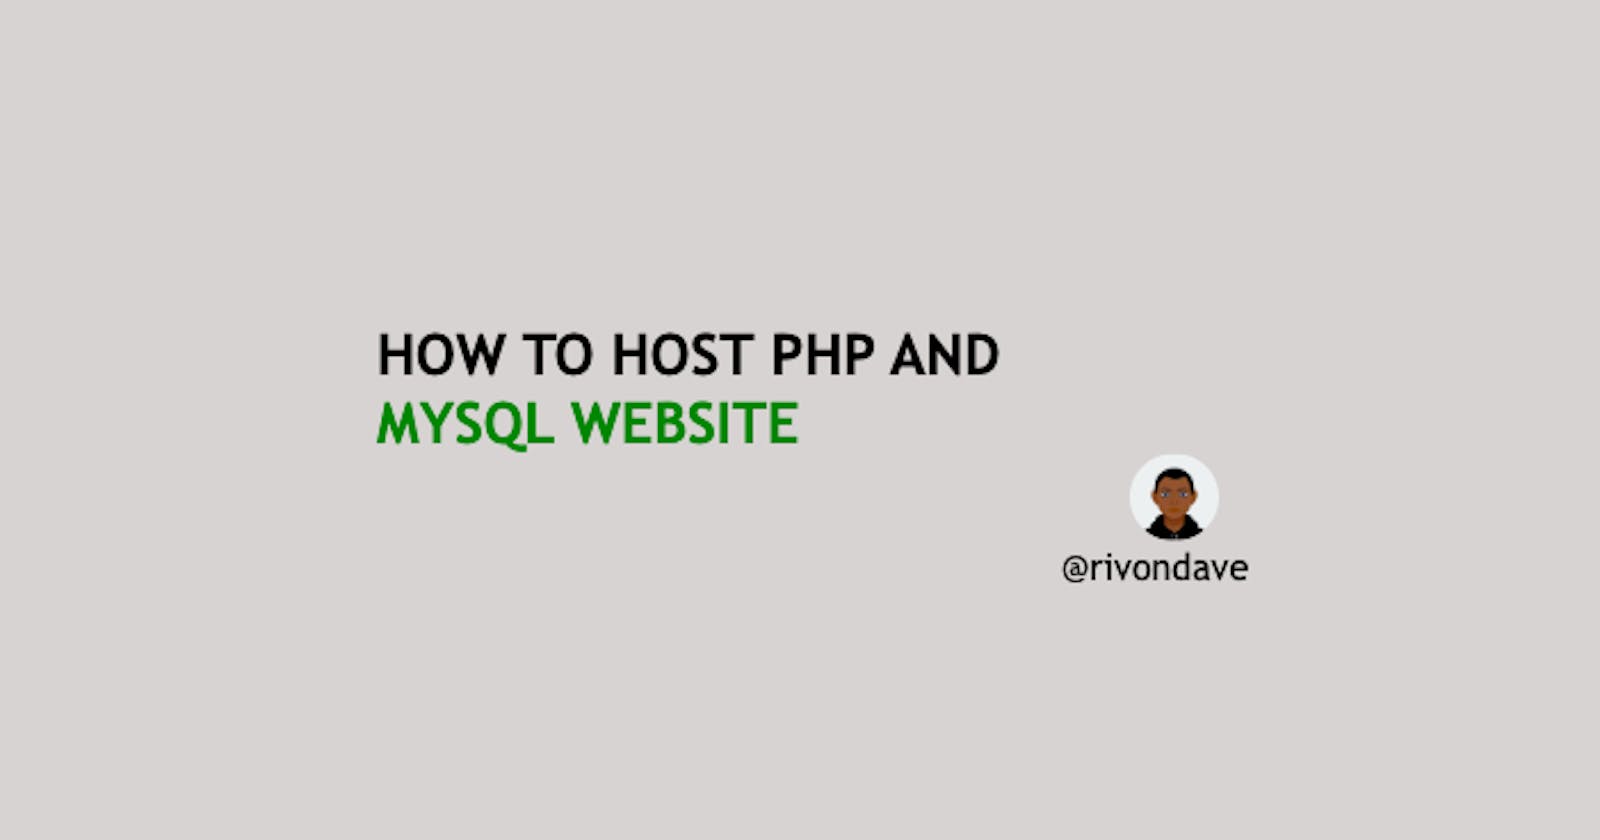 How to host PHP and MySQL website